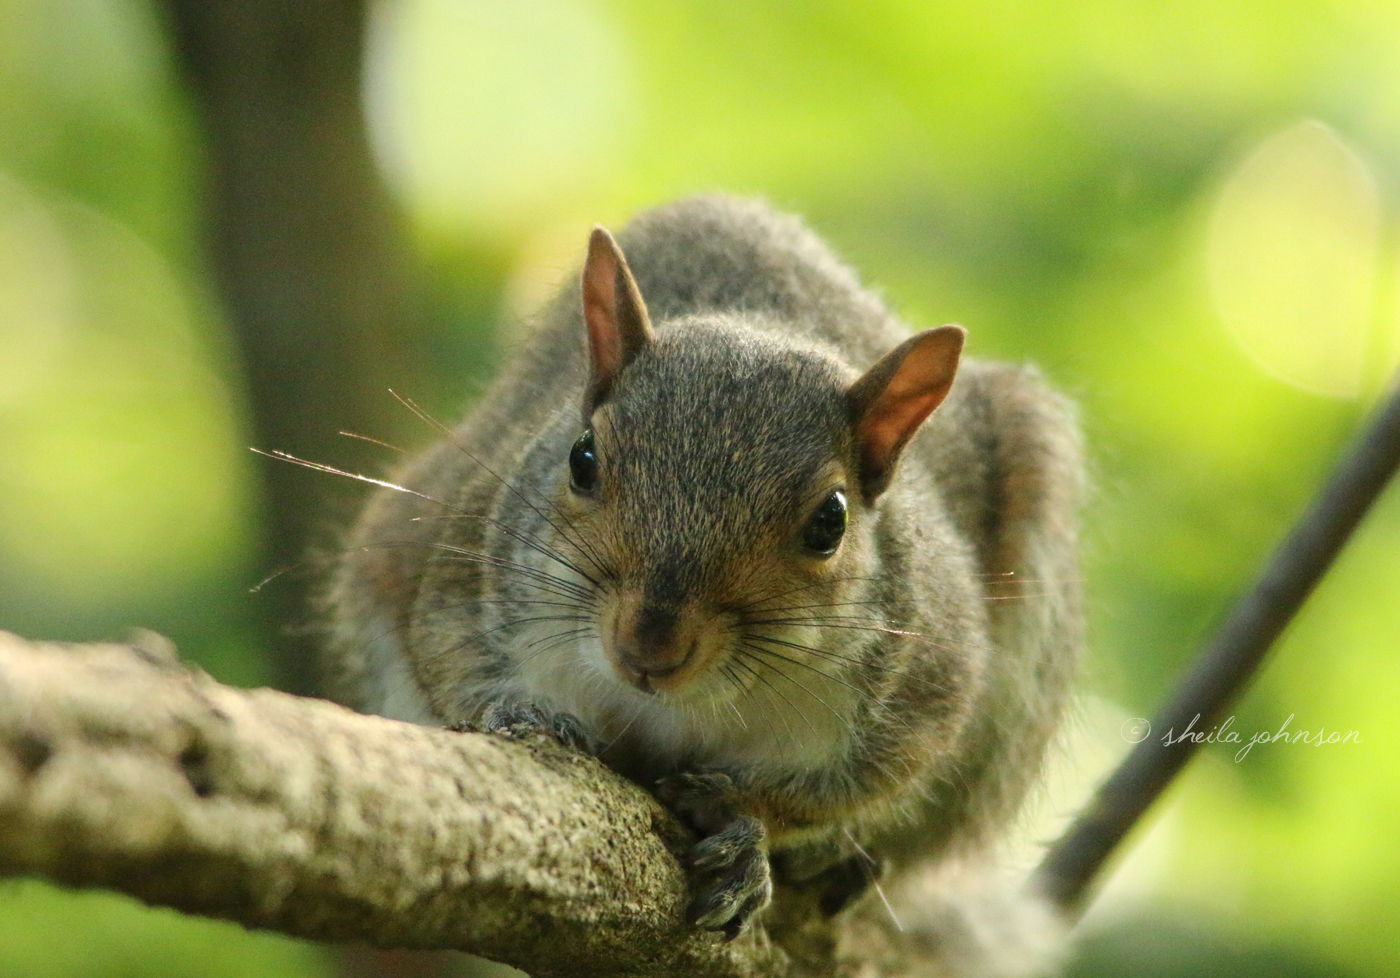 A Maryland Squirrel Awaits This Photographer's Next Move.